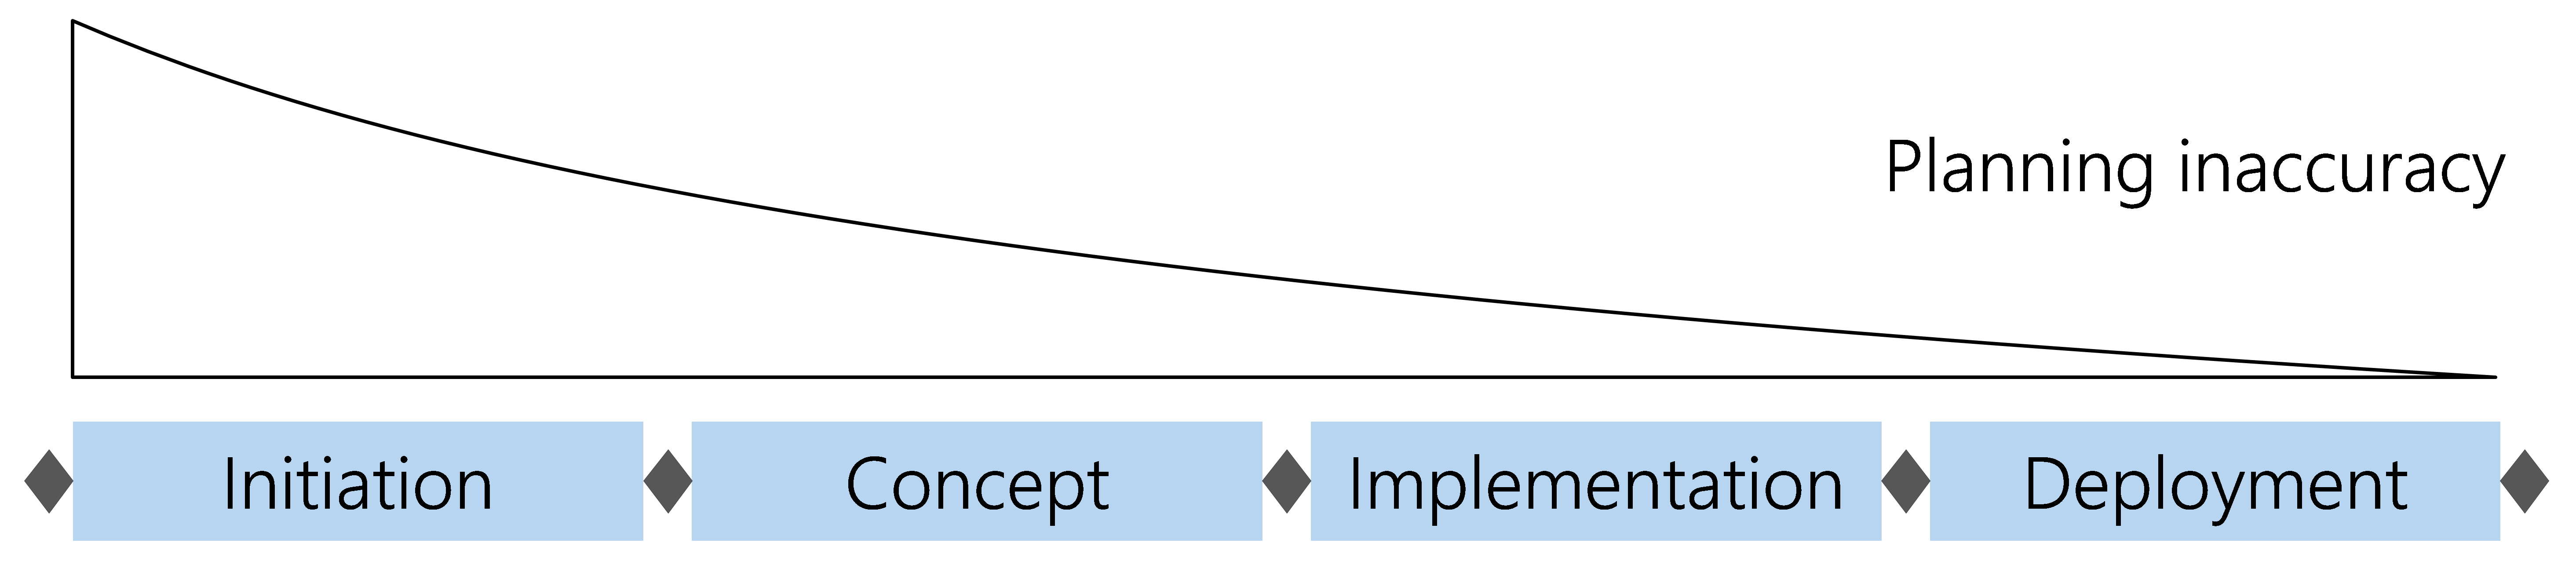 Figure 29: Declining planning inaccuracy over the course of the project